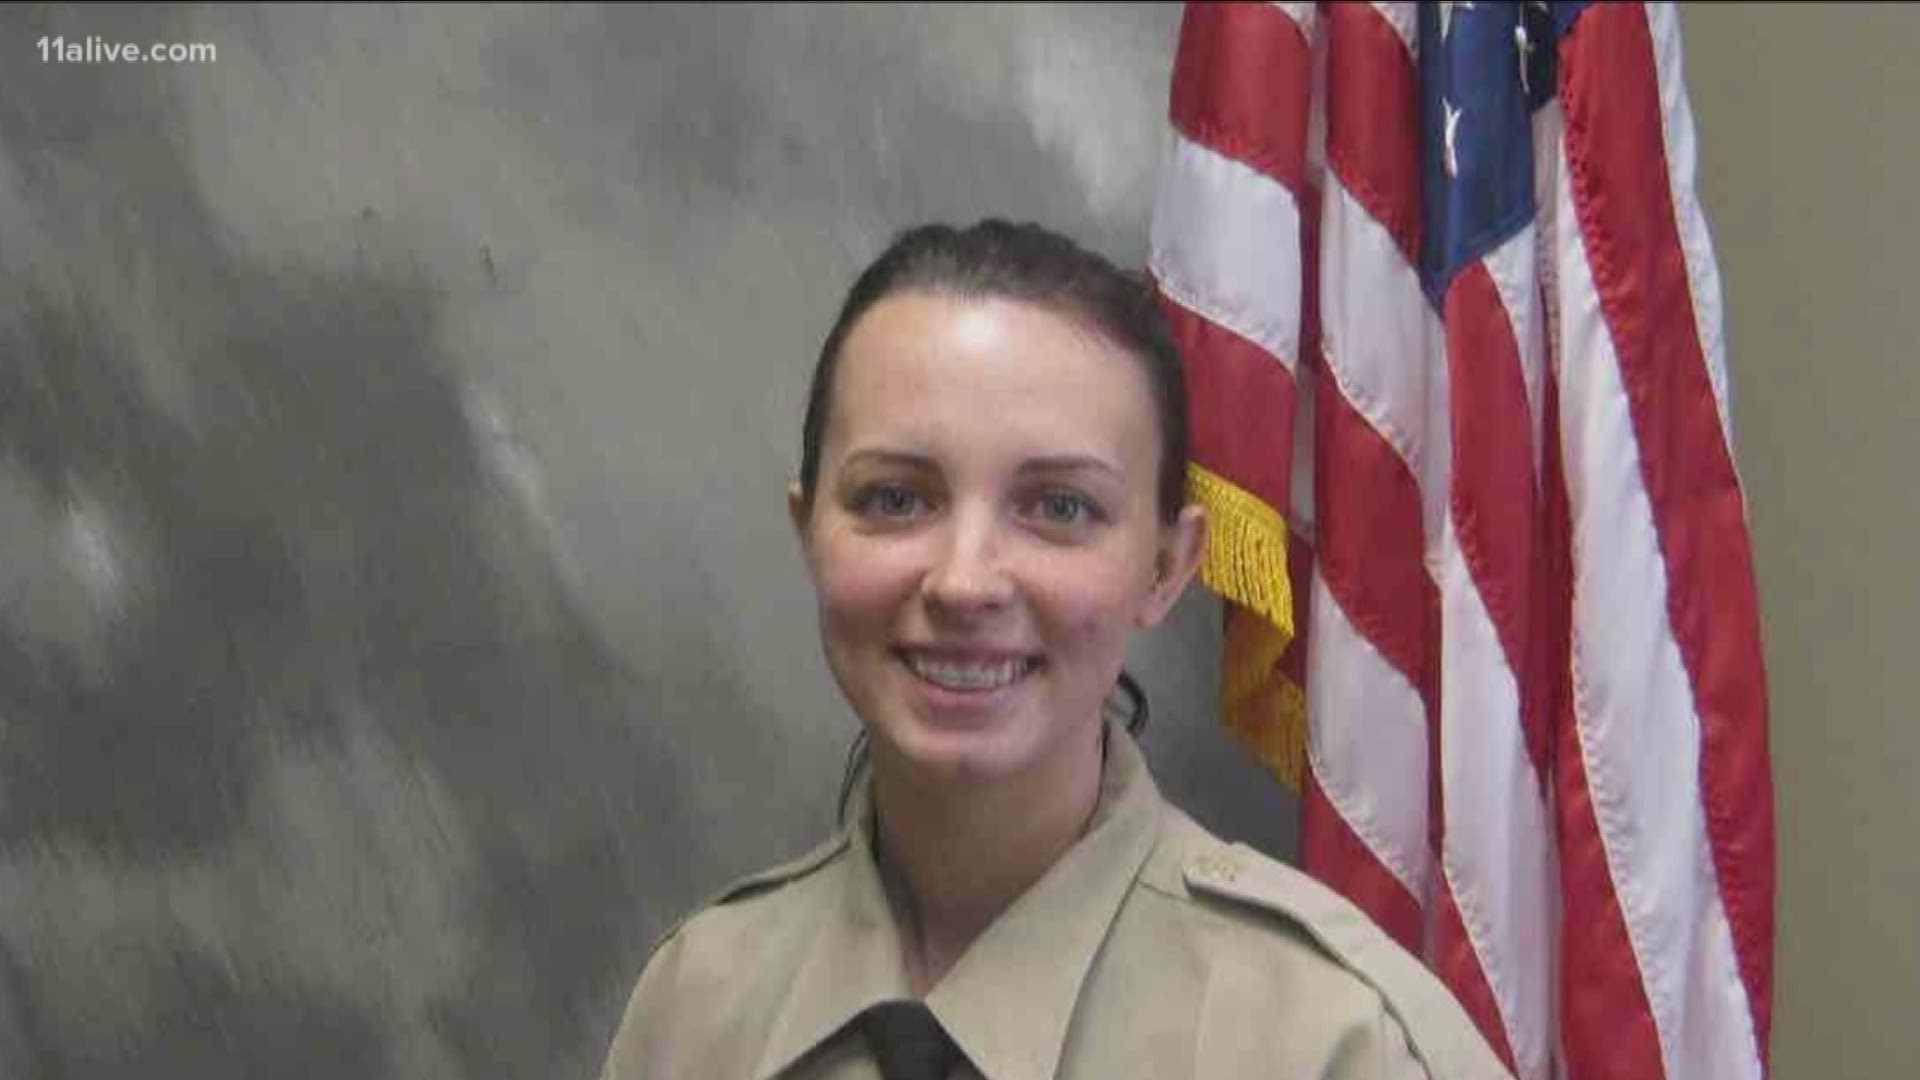 Just days after a positive update, the family of Pickens County Deputy Cassie Defoor is dealing with another blow as they pray for her recovery.